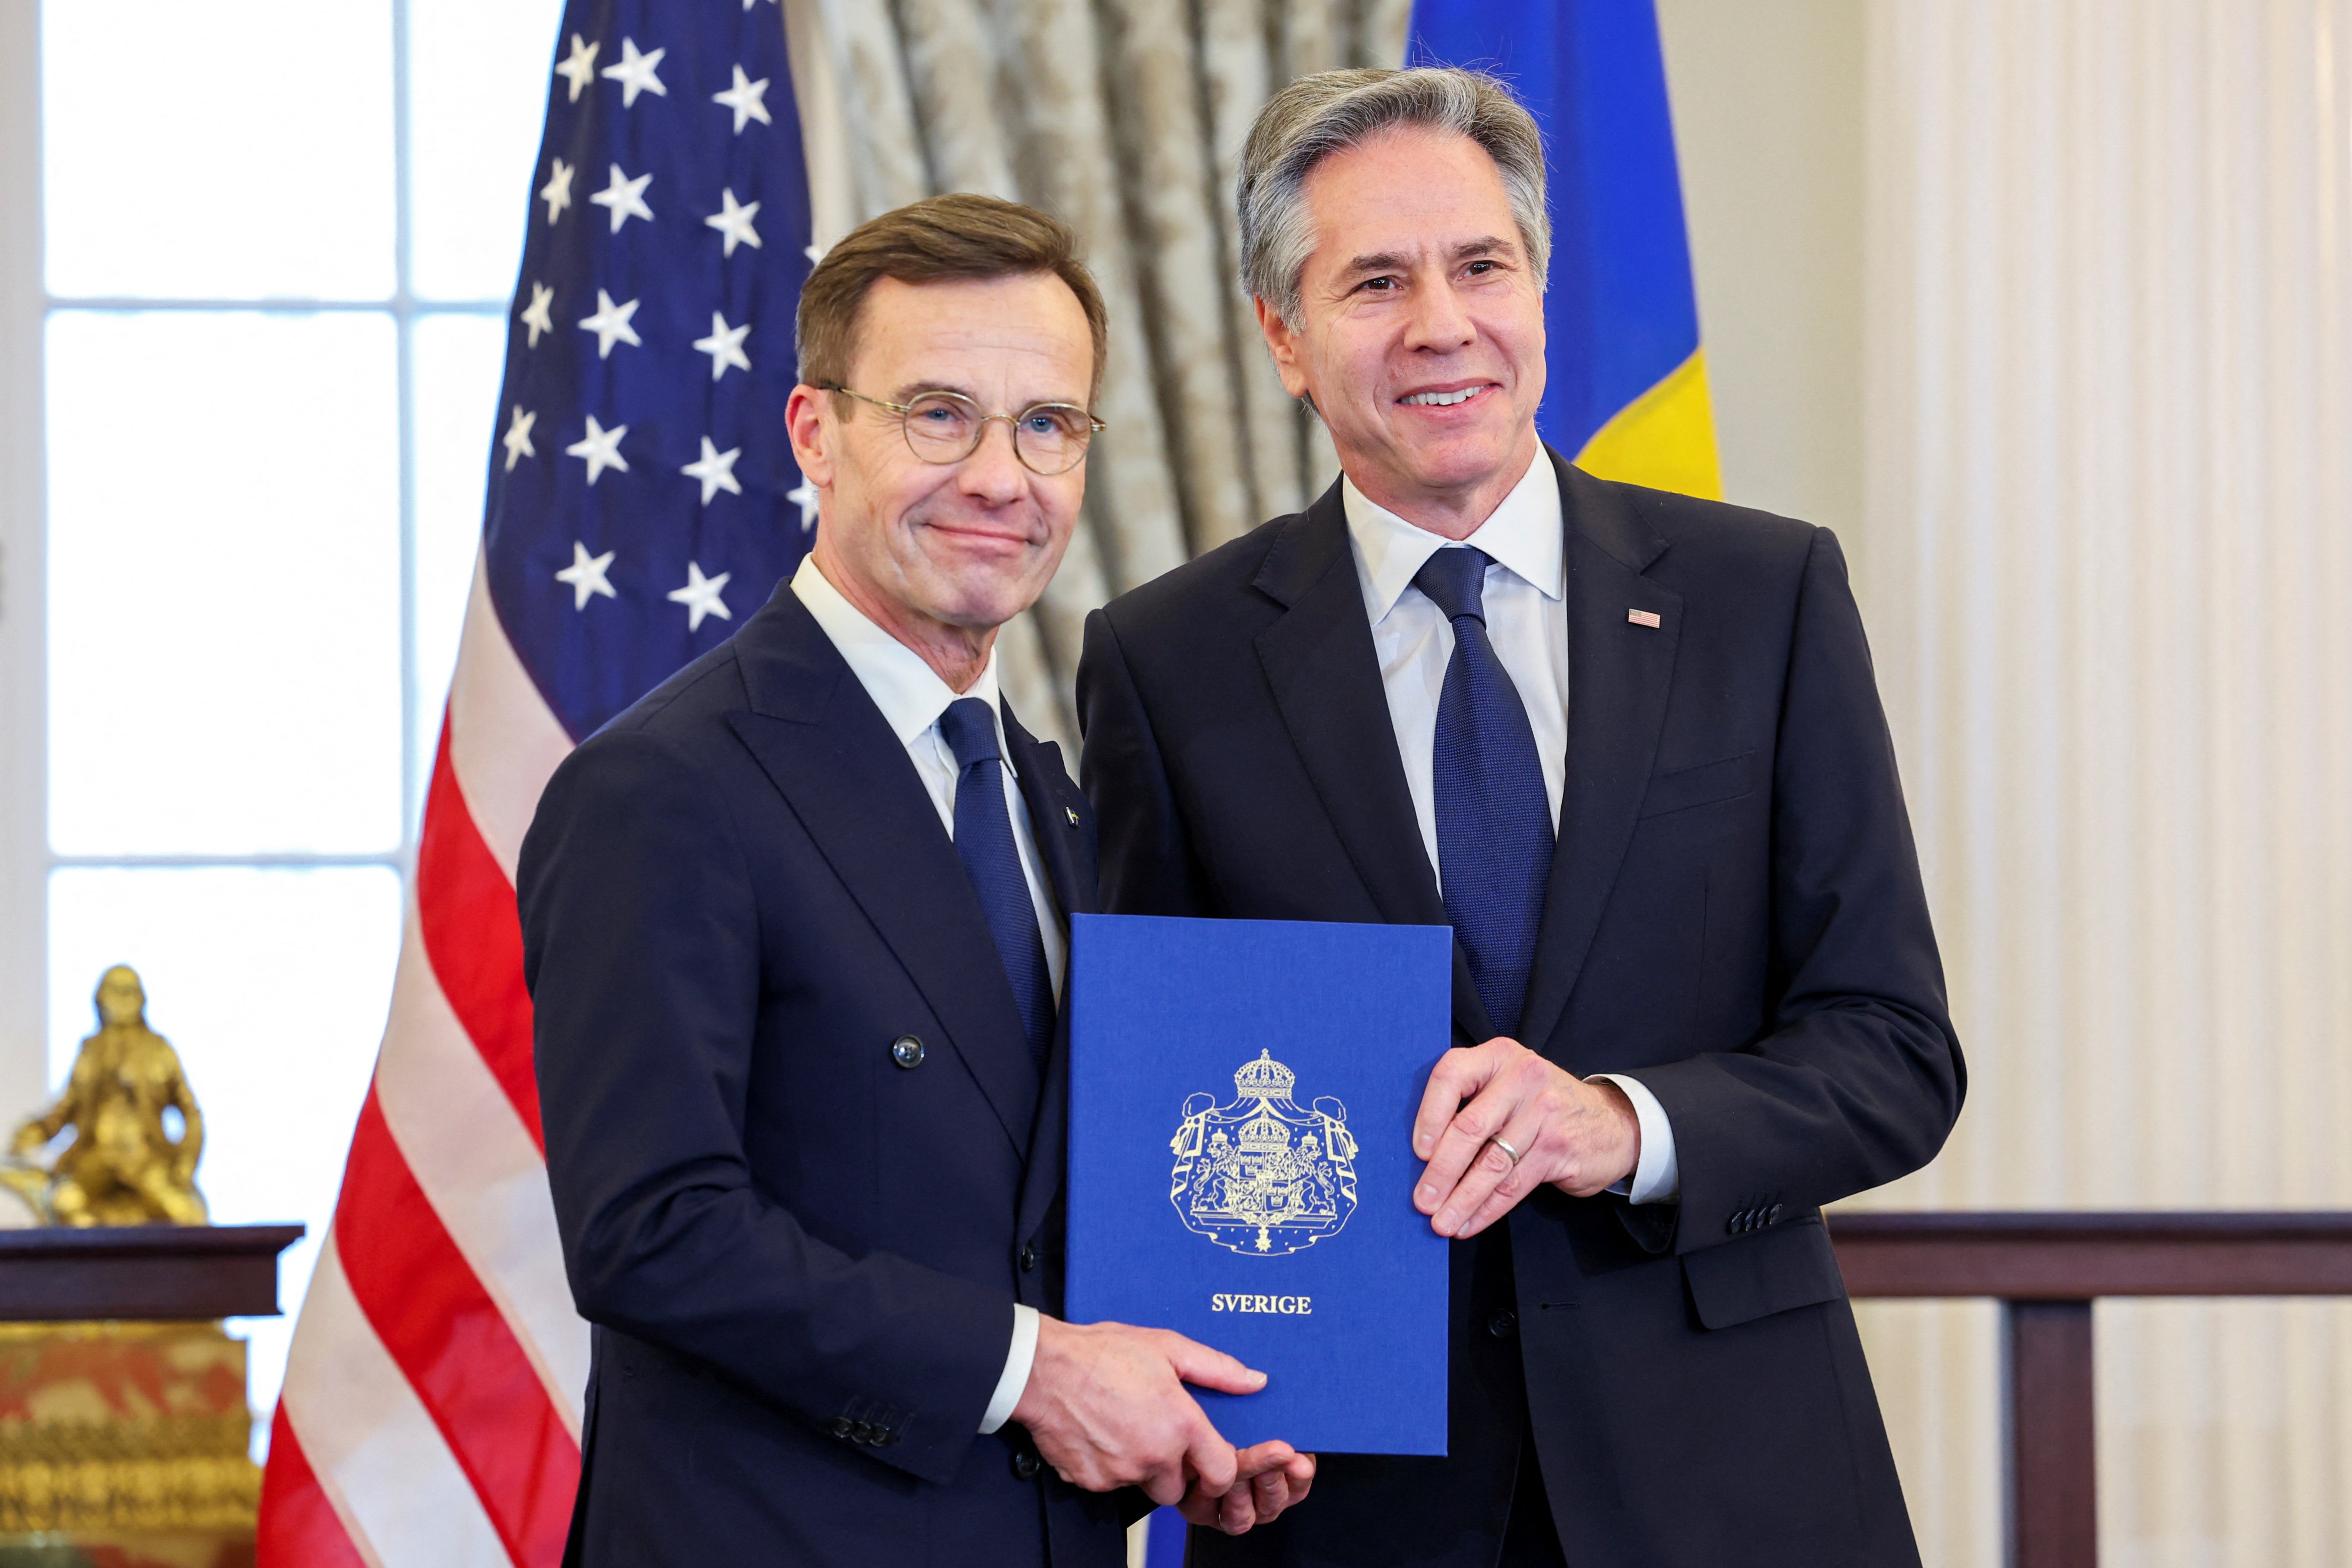 US Secretary of State Antony Blinken, right, accepts Sweden’s instruments of accession from Swedish Prime Minister Ulf Kristersson